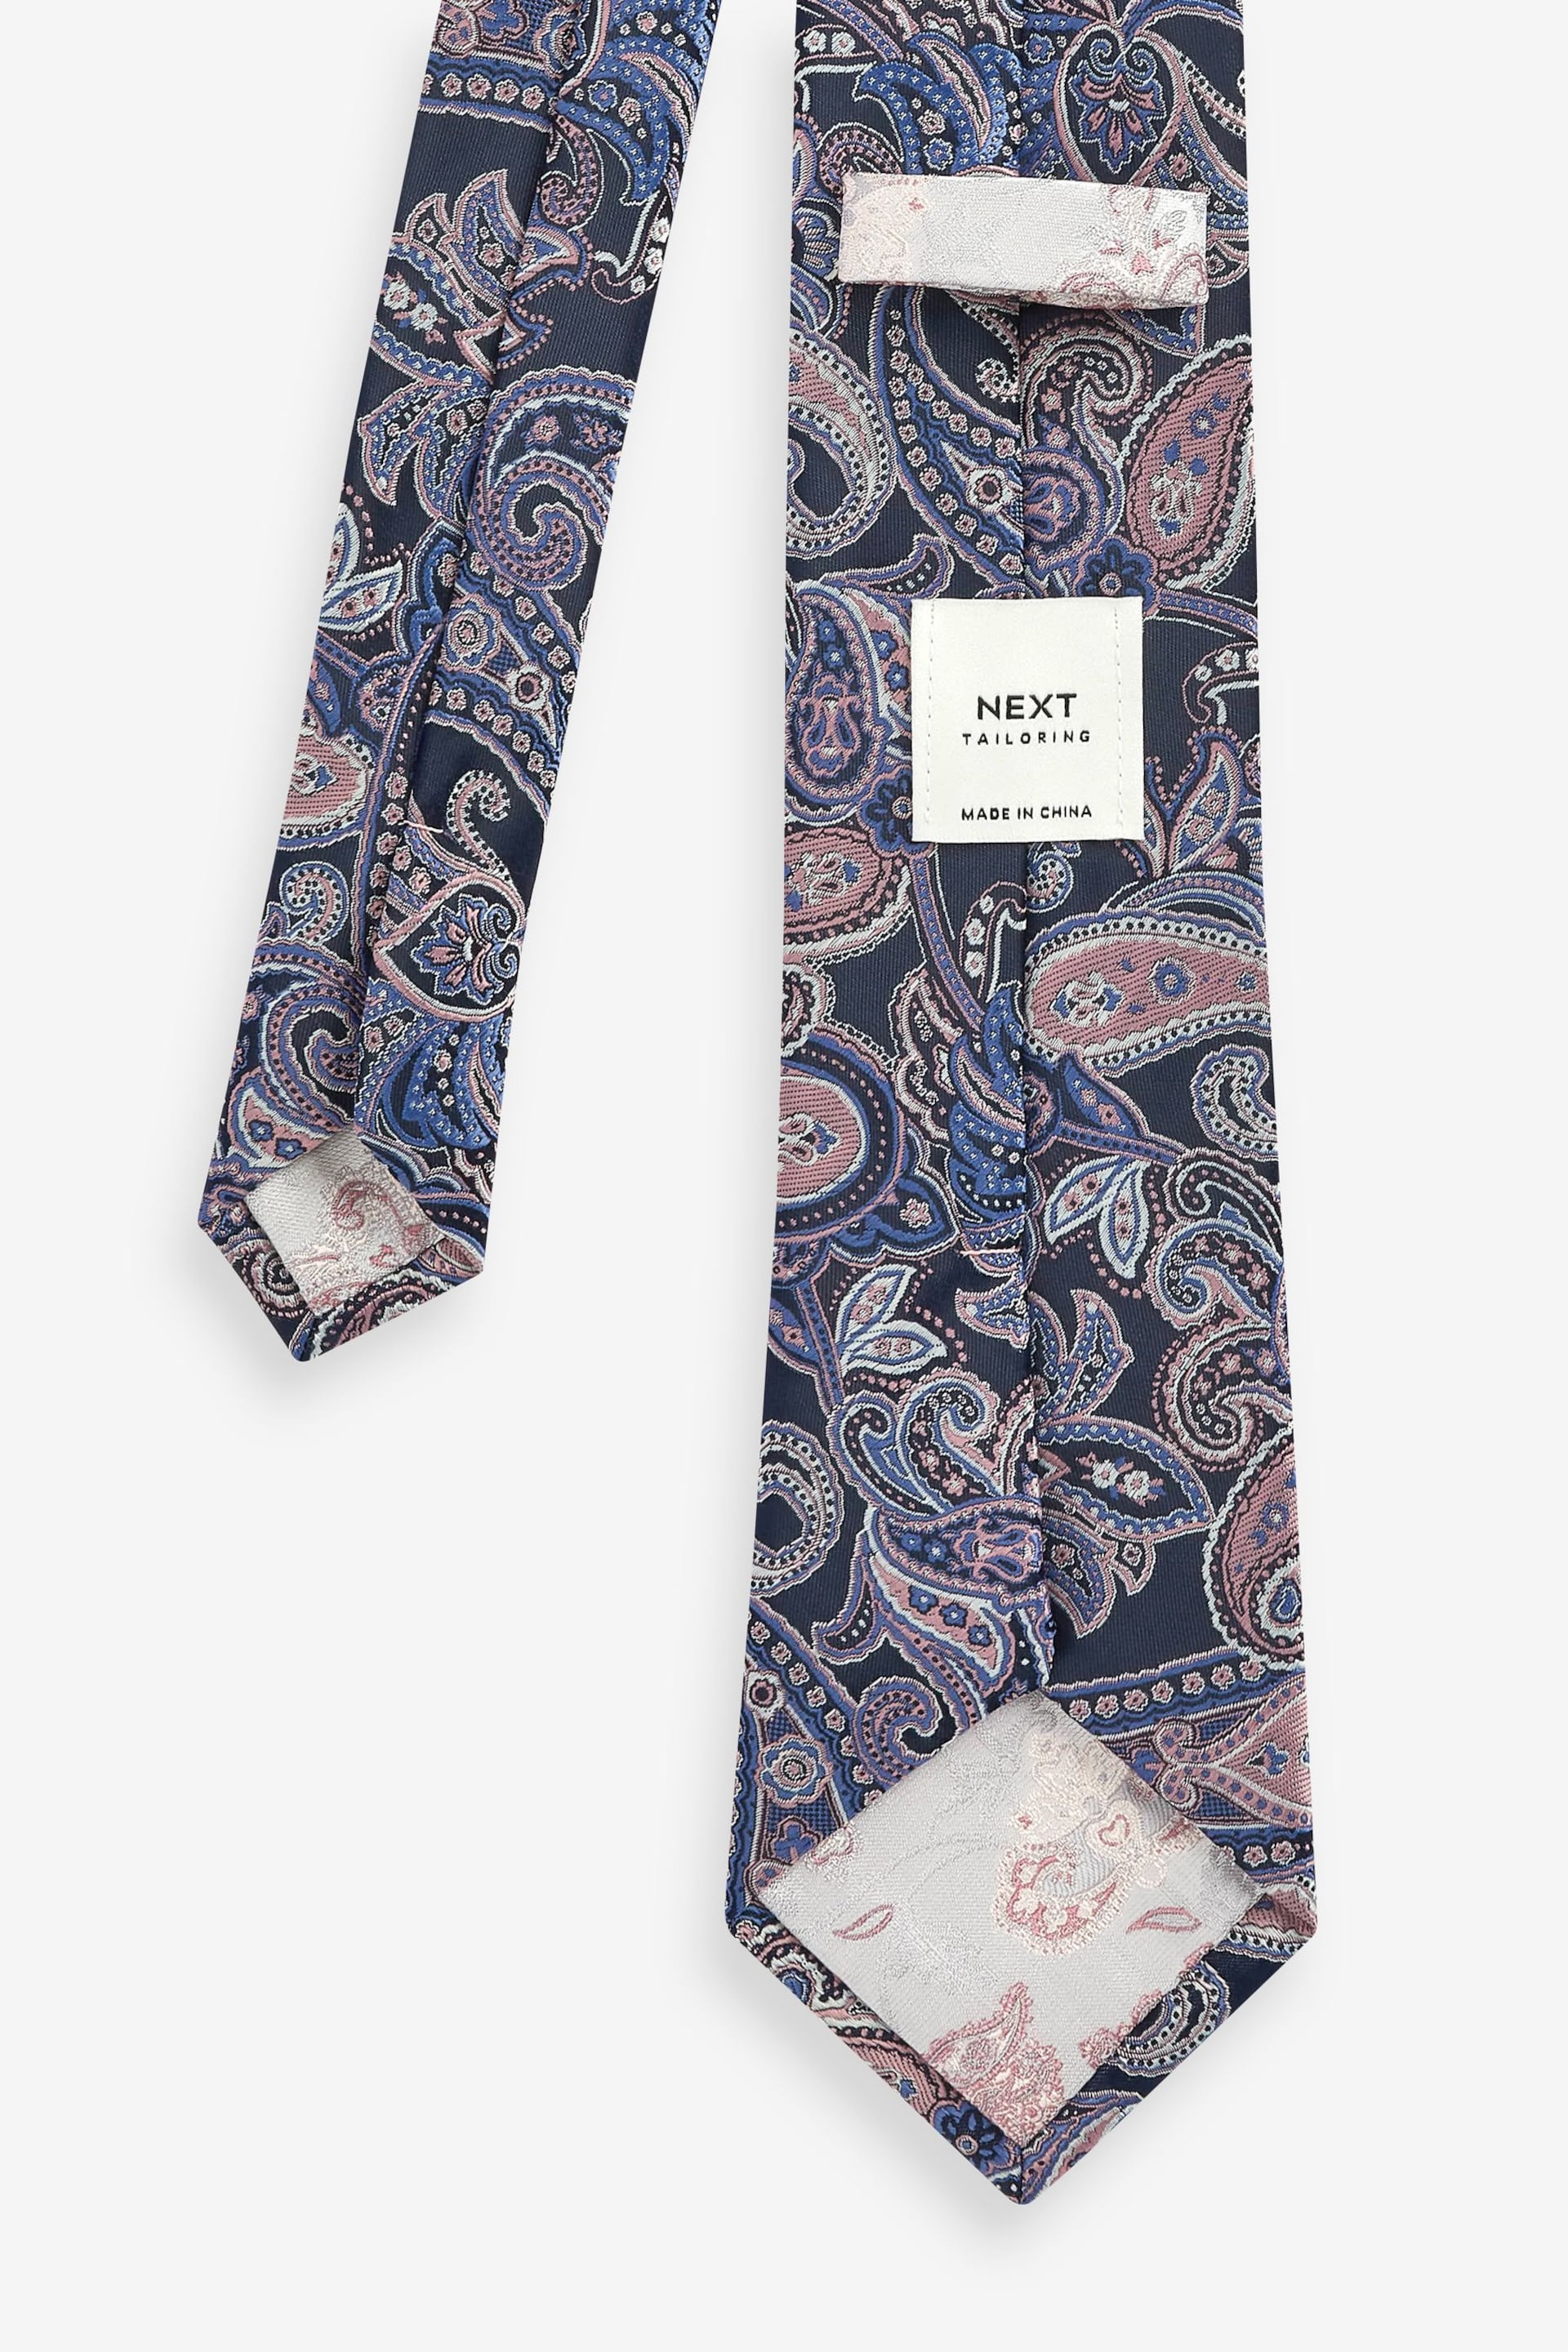 Blue Navy/Pink Paisley Pattern Tie And Tie Clip - Image 3 of 3